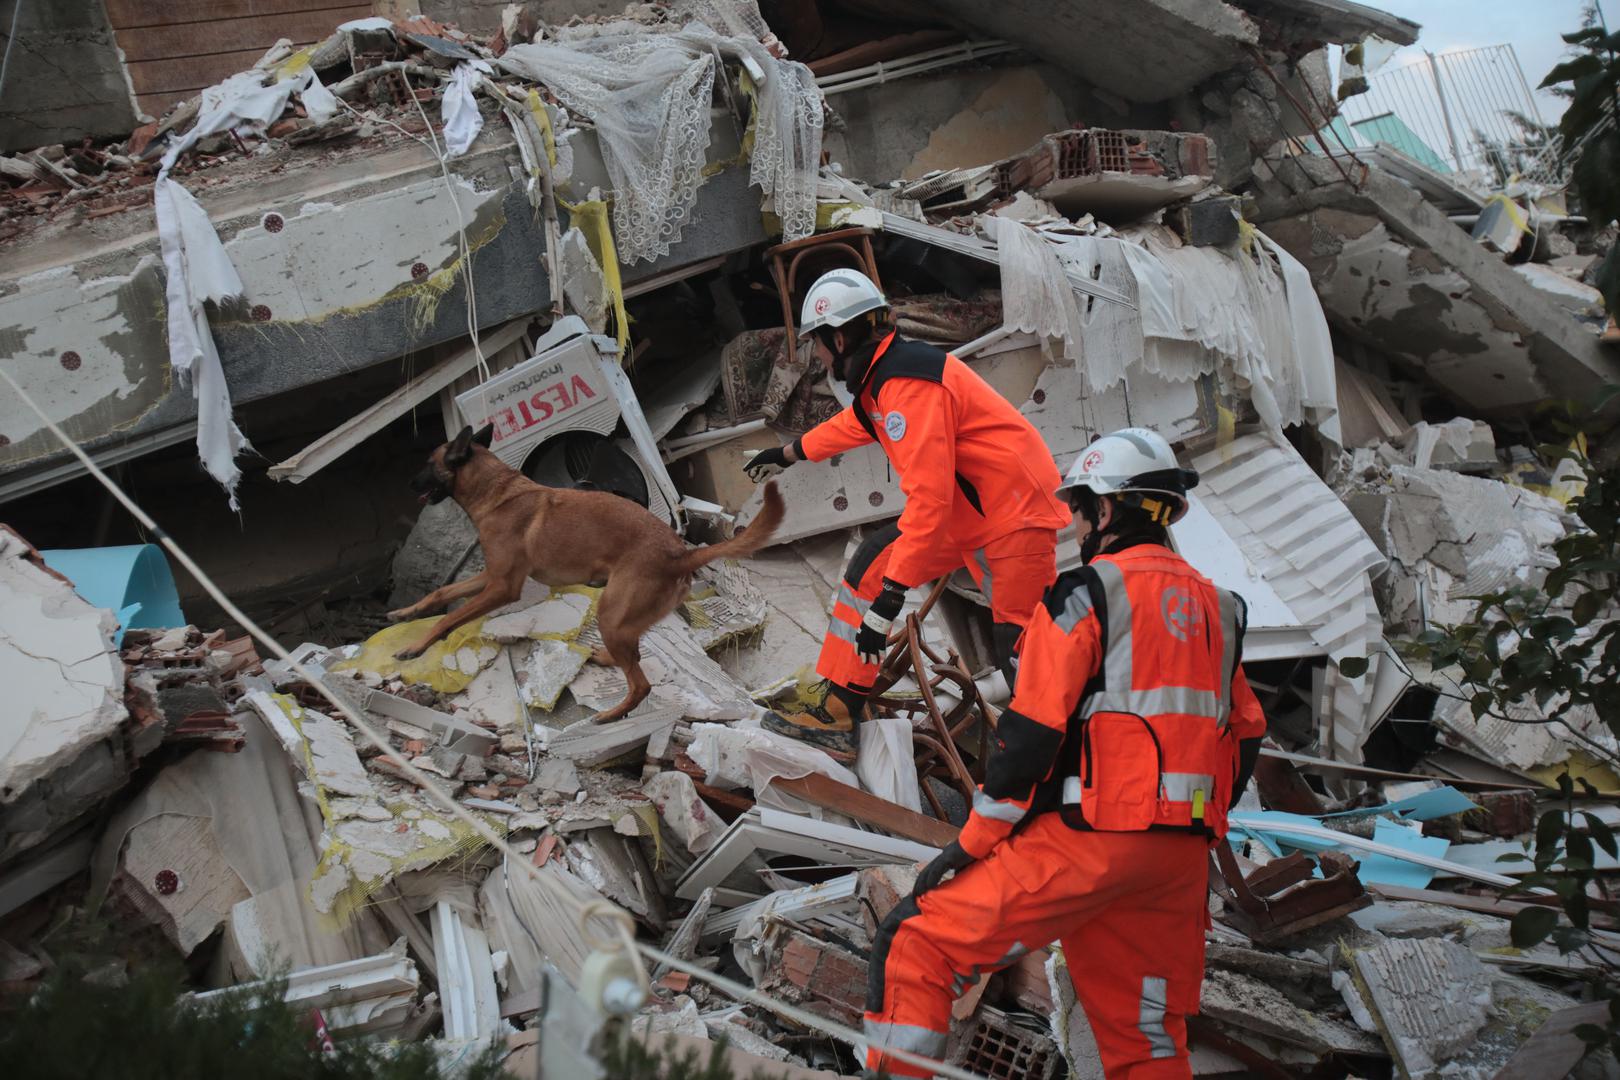 Switzerland rescue team search a ruined building in Hatay, Turkey, February 7, 2023. A powerful earthquake has hit a wide area in south-eastern Turkey, near the Syrian border, killing more than 7000 people and trapping many others. Photo by Serdar Ozsoy/Depo Photos/ABACAPRESS.COM Photo: Depo Photos/ABACA/ABACA